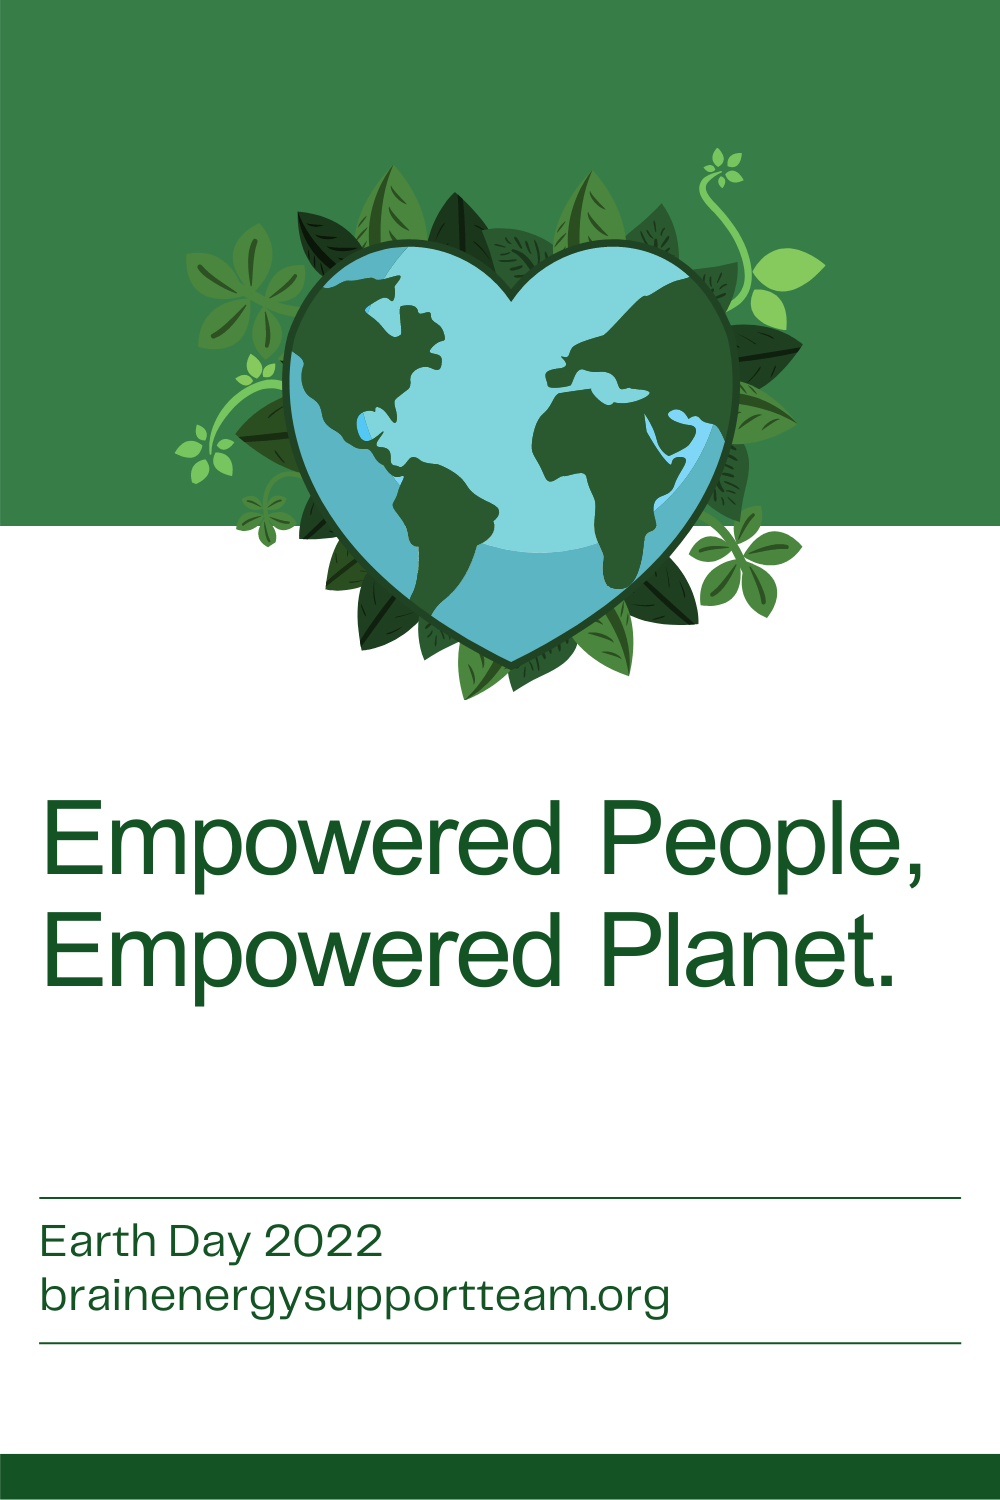 Simple drawing of a heart shaped Earth with lush plants emerging. Text reads empowered people, empowered planet